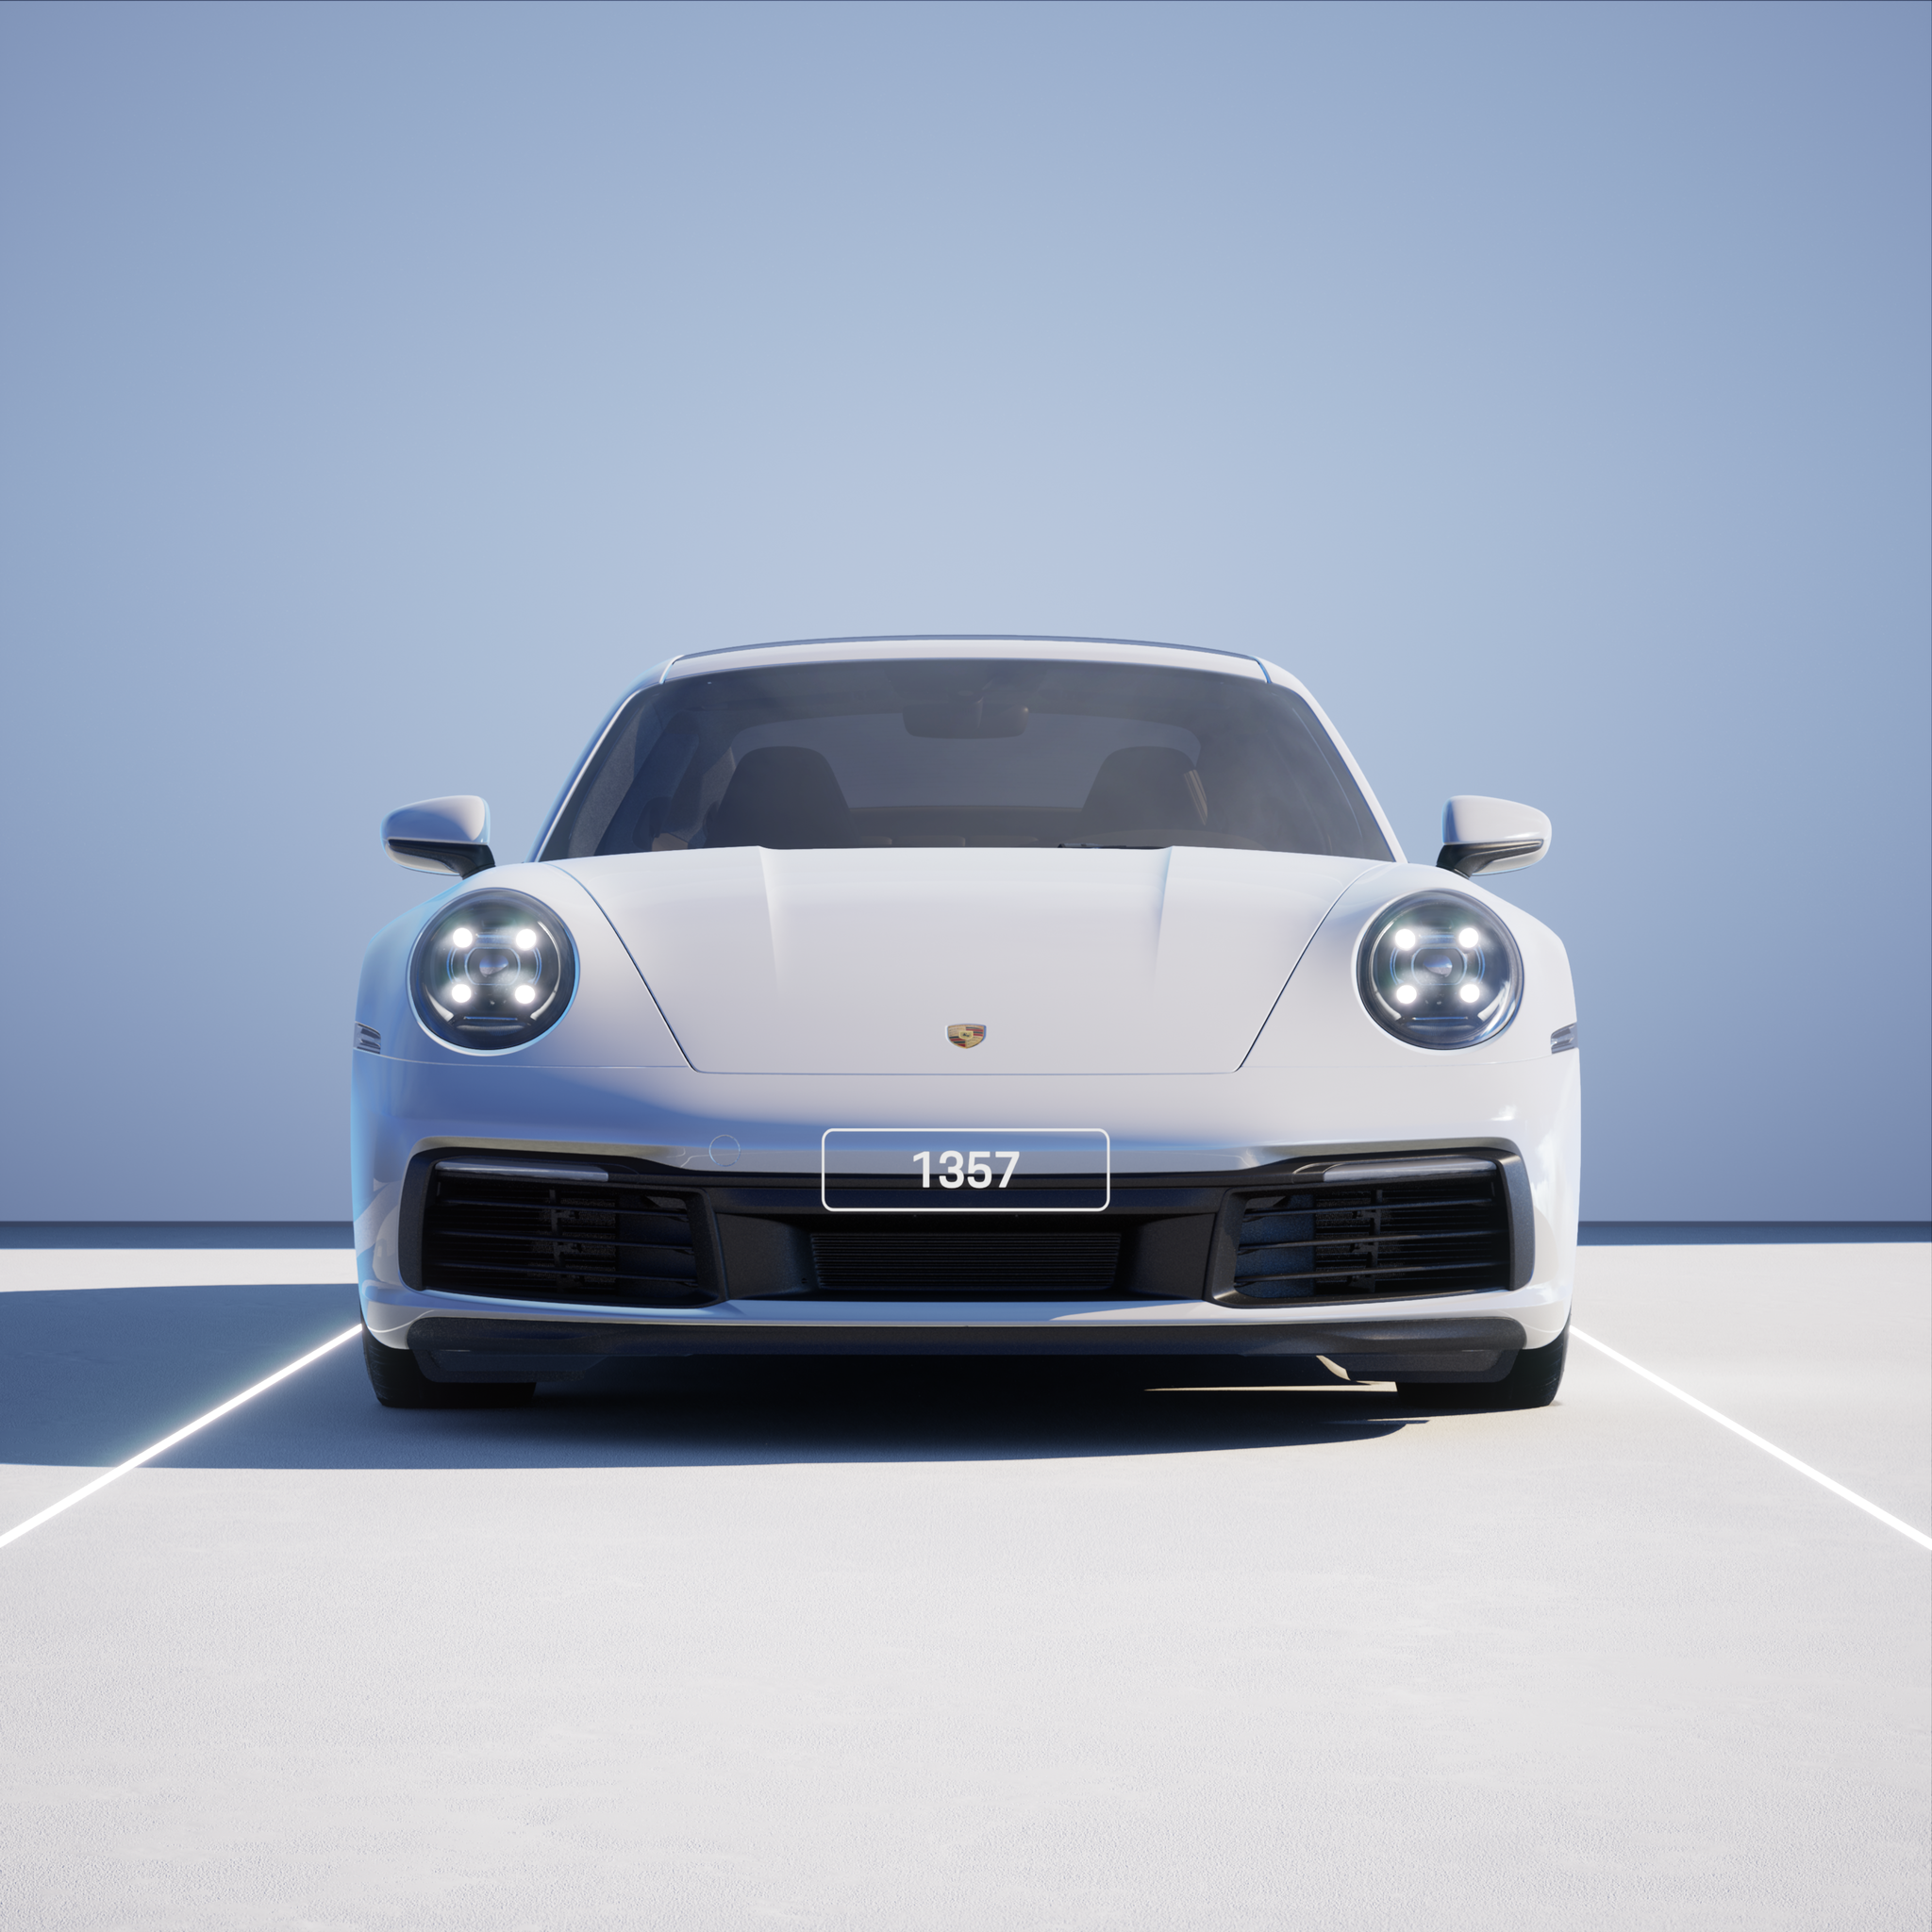 The PORSCHΞ 911 1357 image in phase